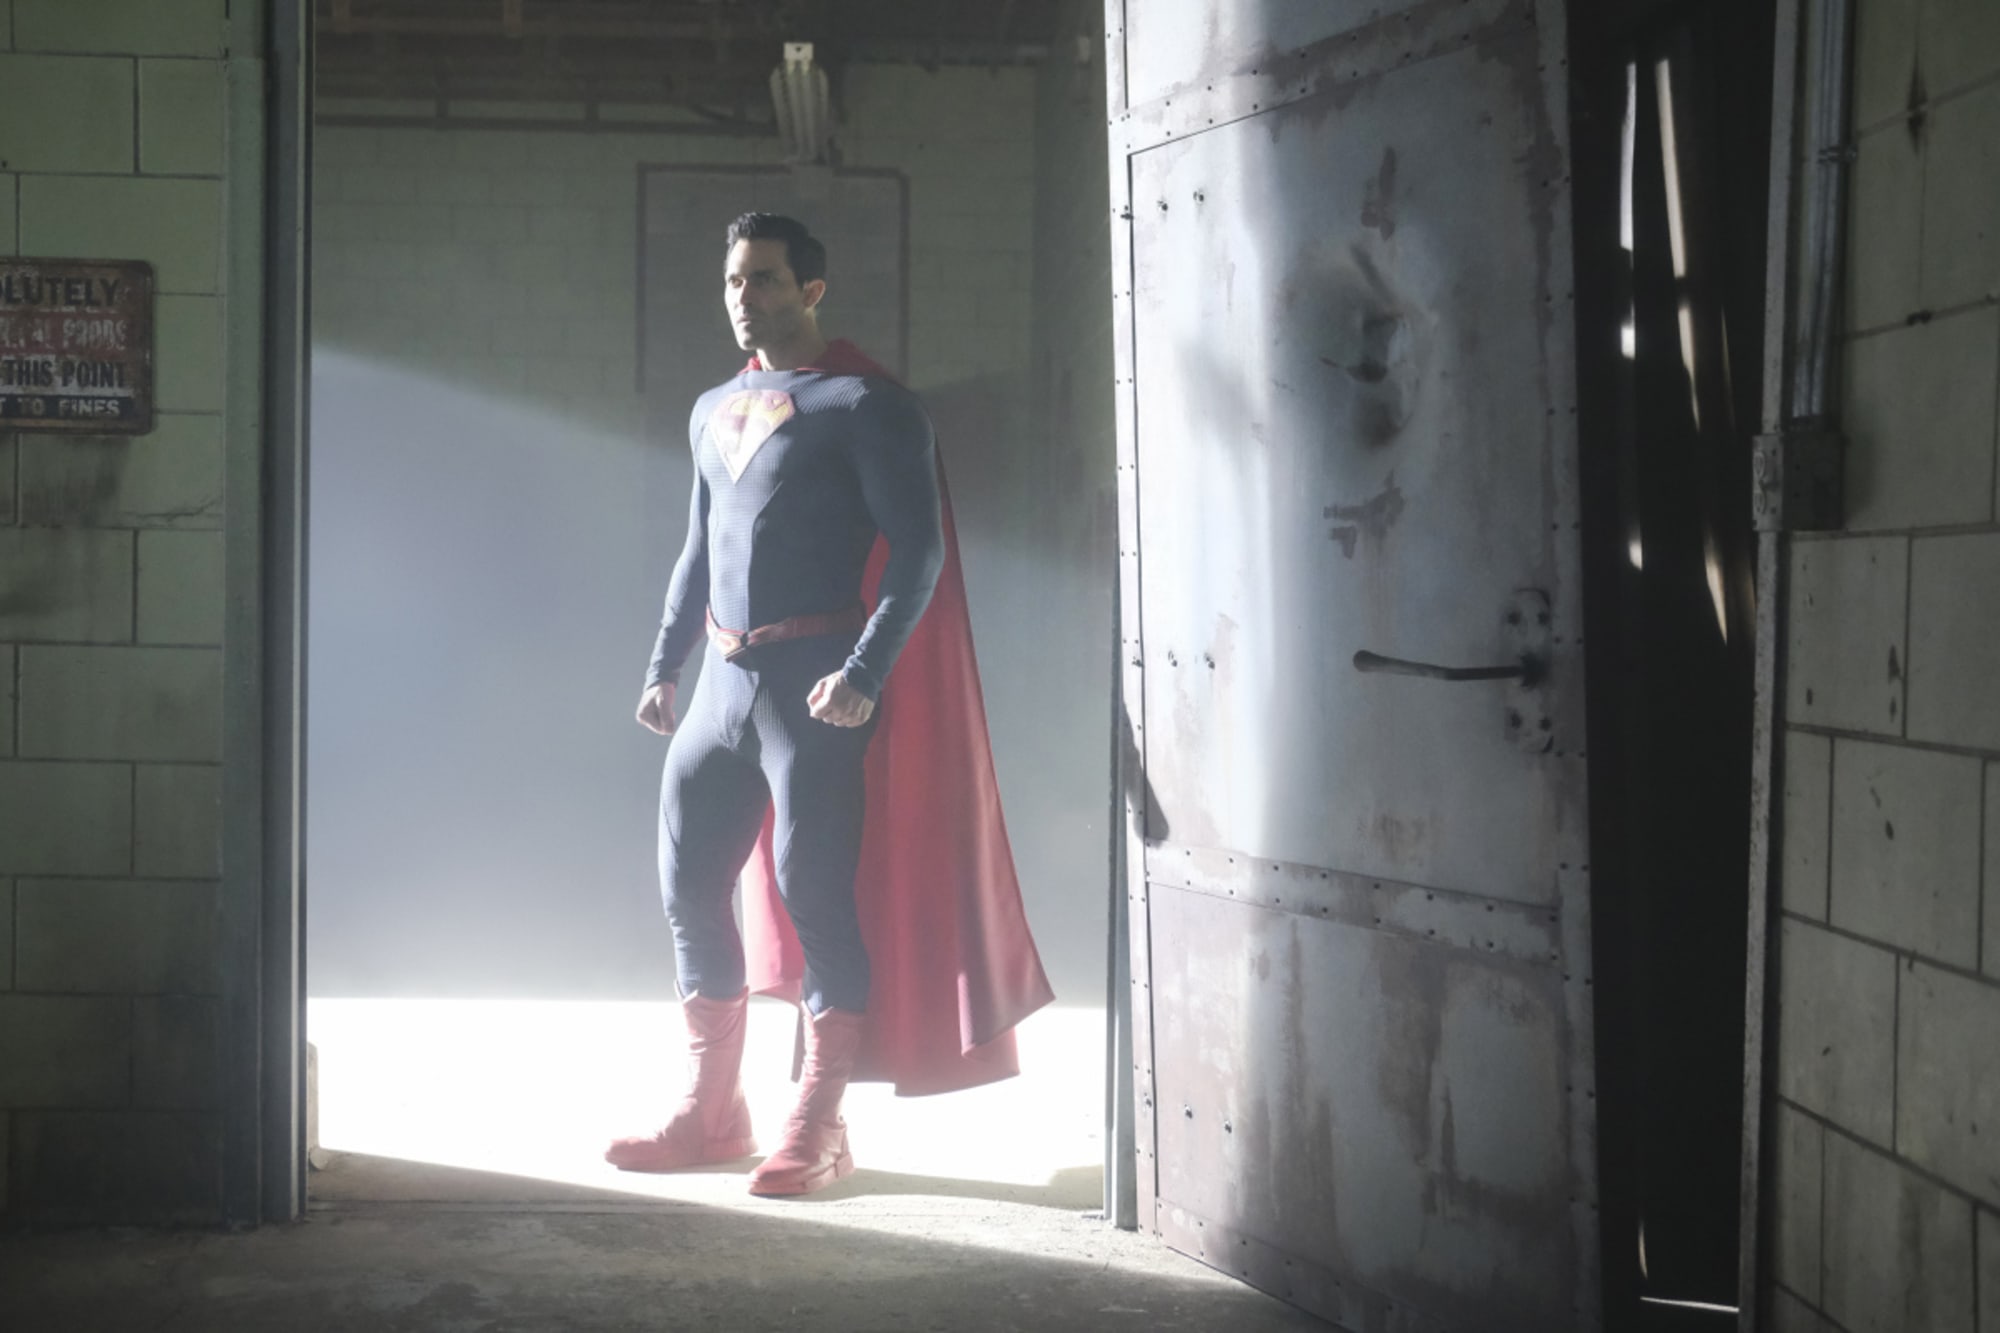 Superman and Lois season 2 finale ending explained: Who is [SPOILER]?